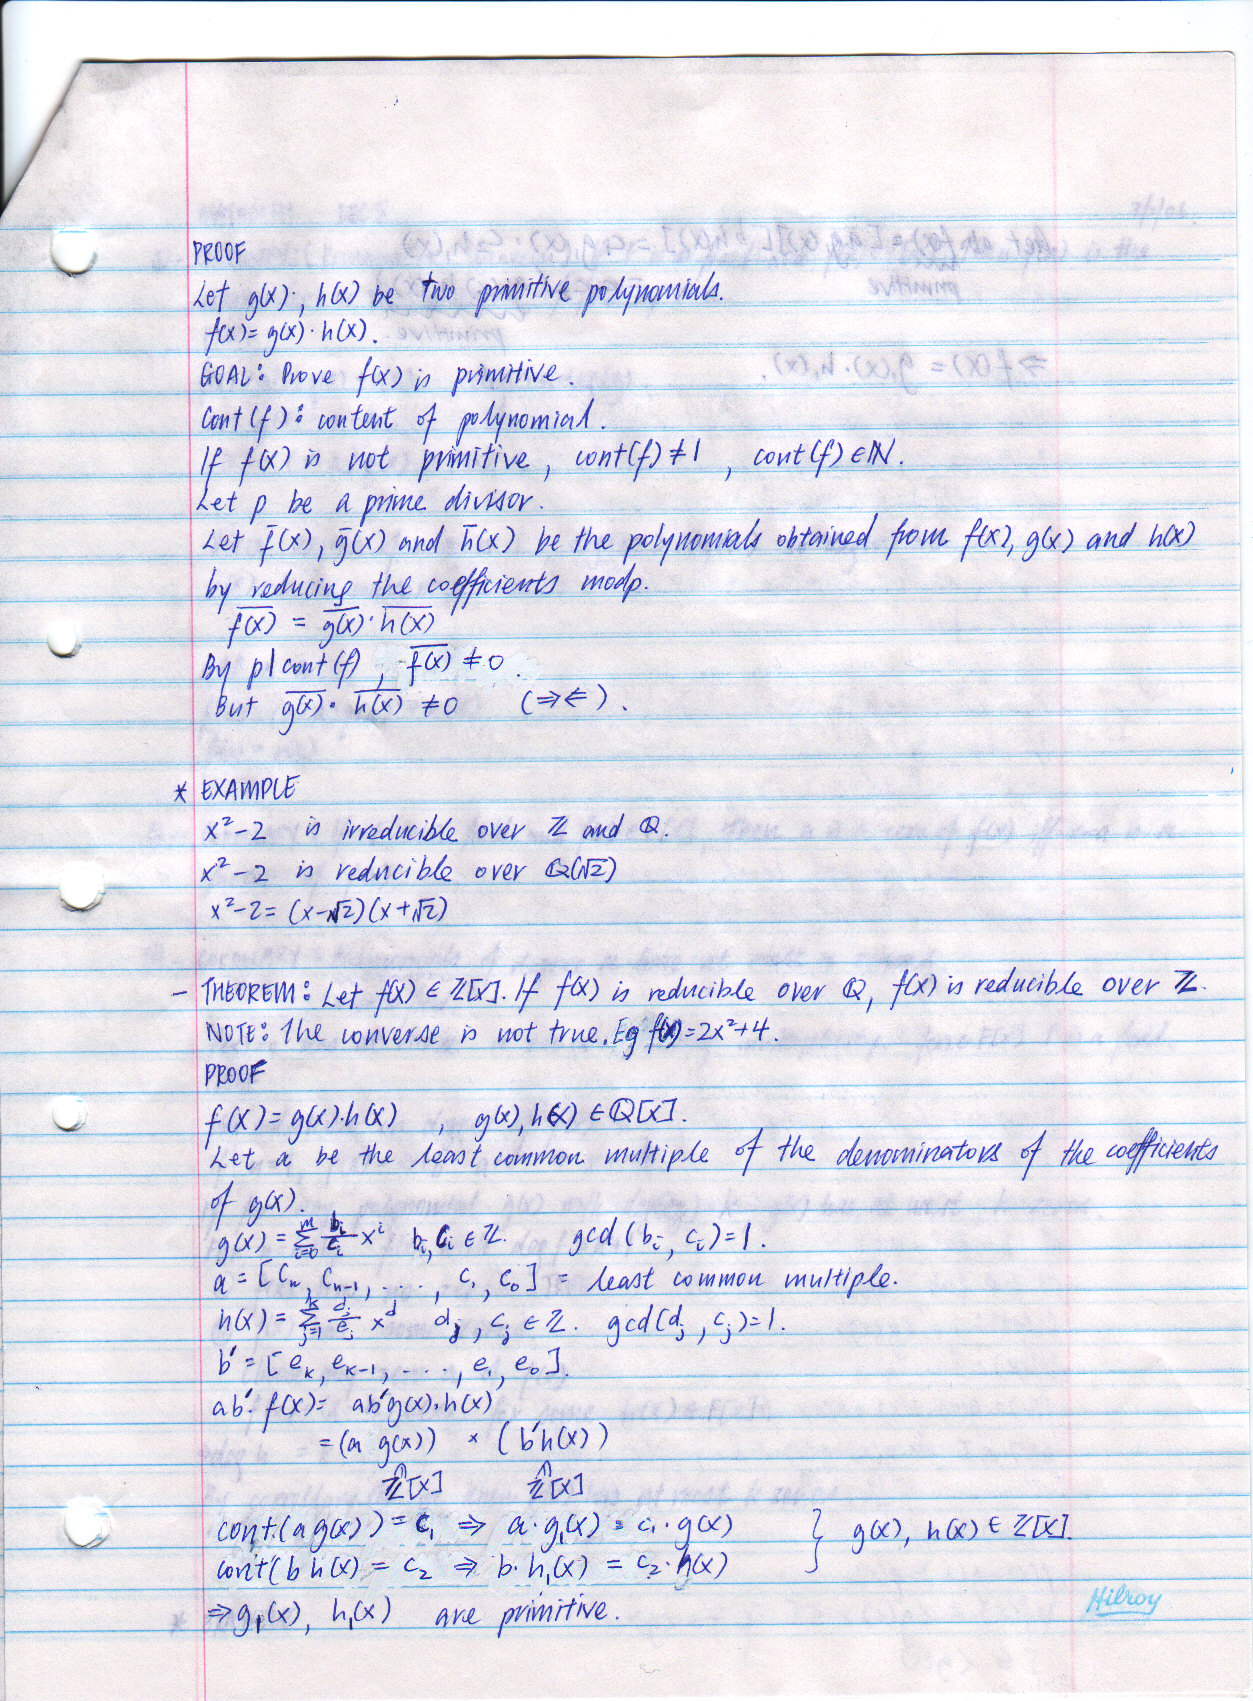 07-401 lecture5-pg5.jpg